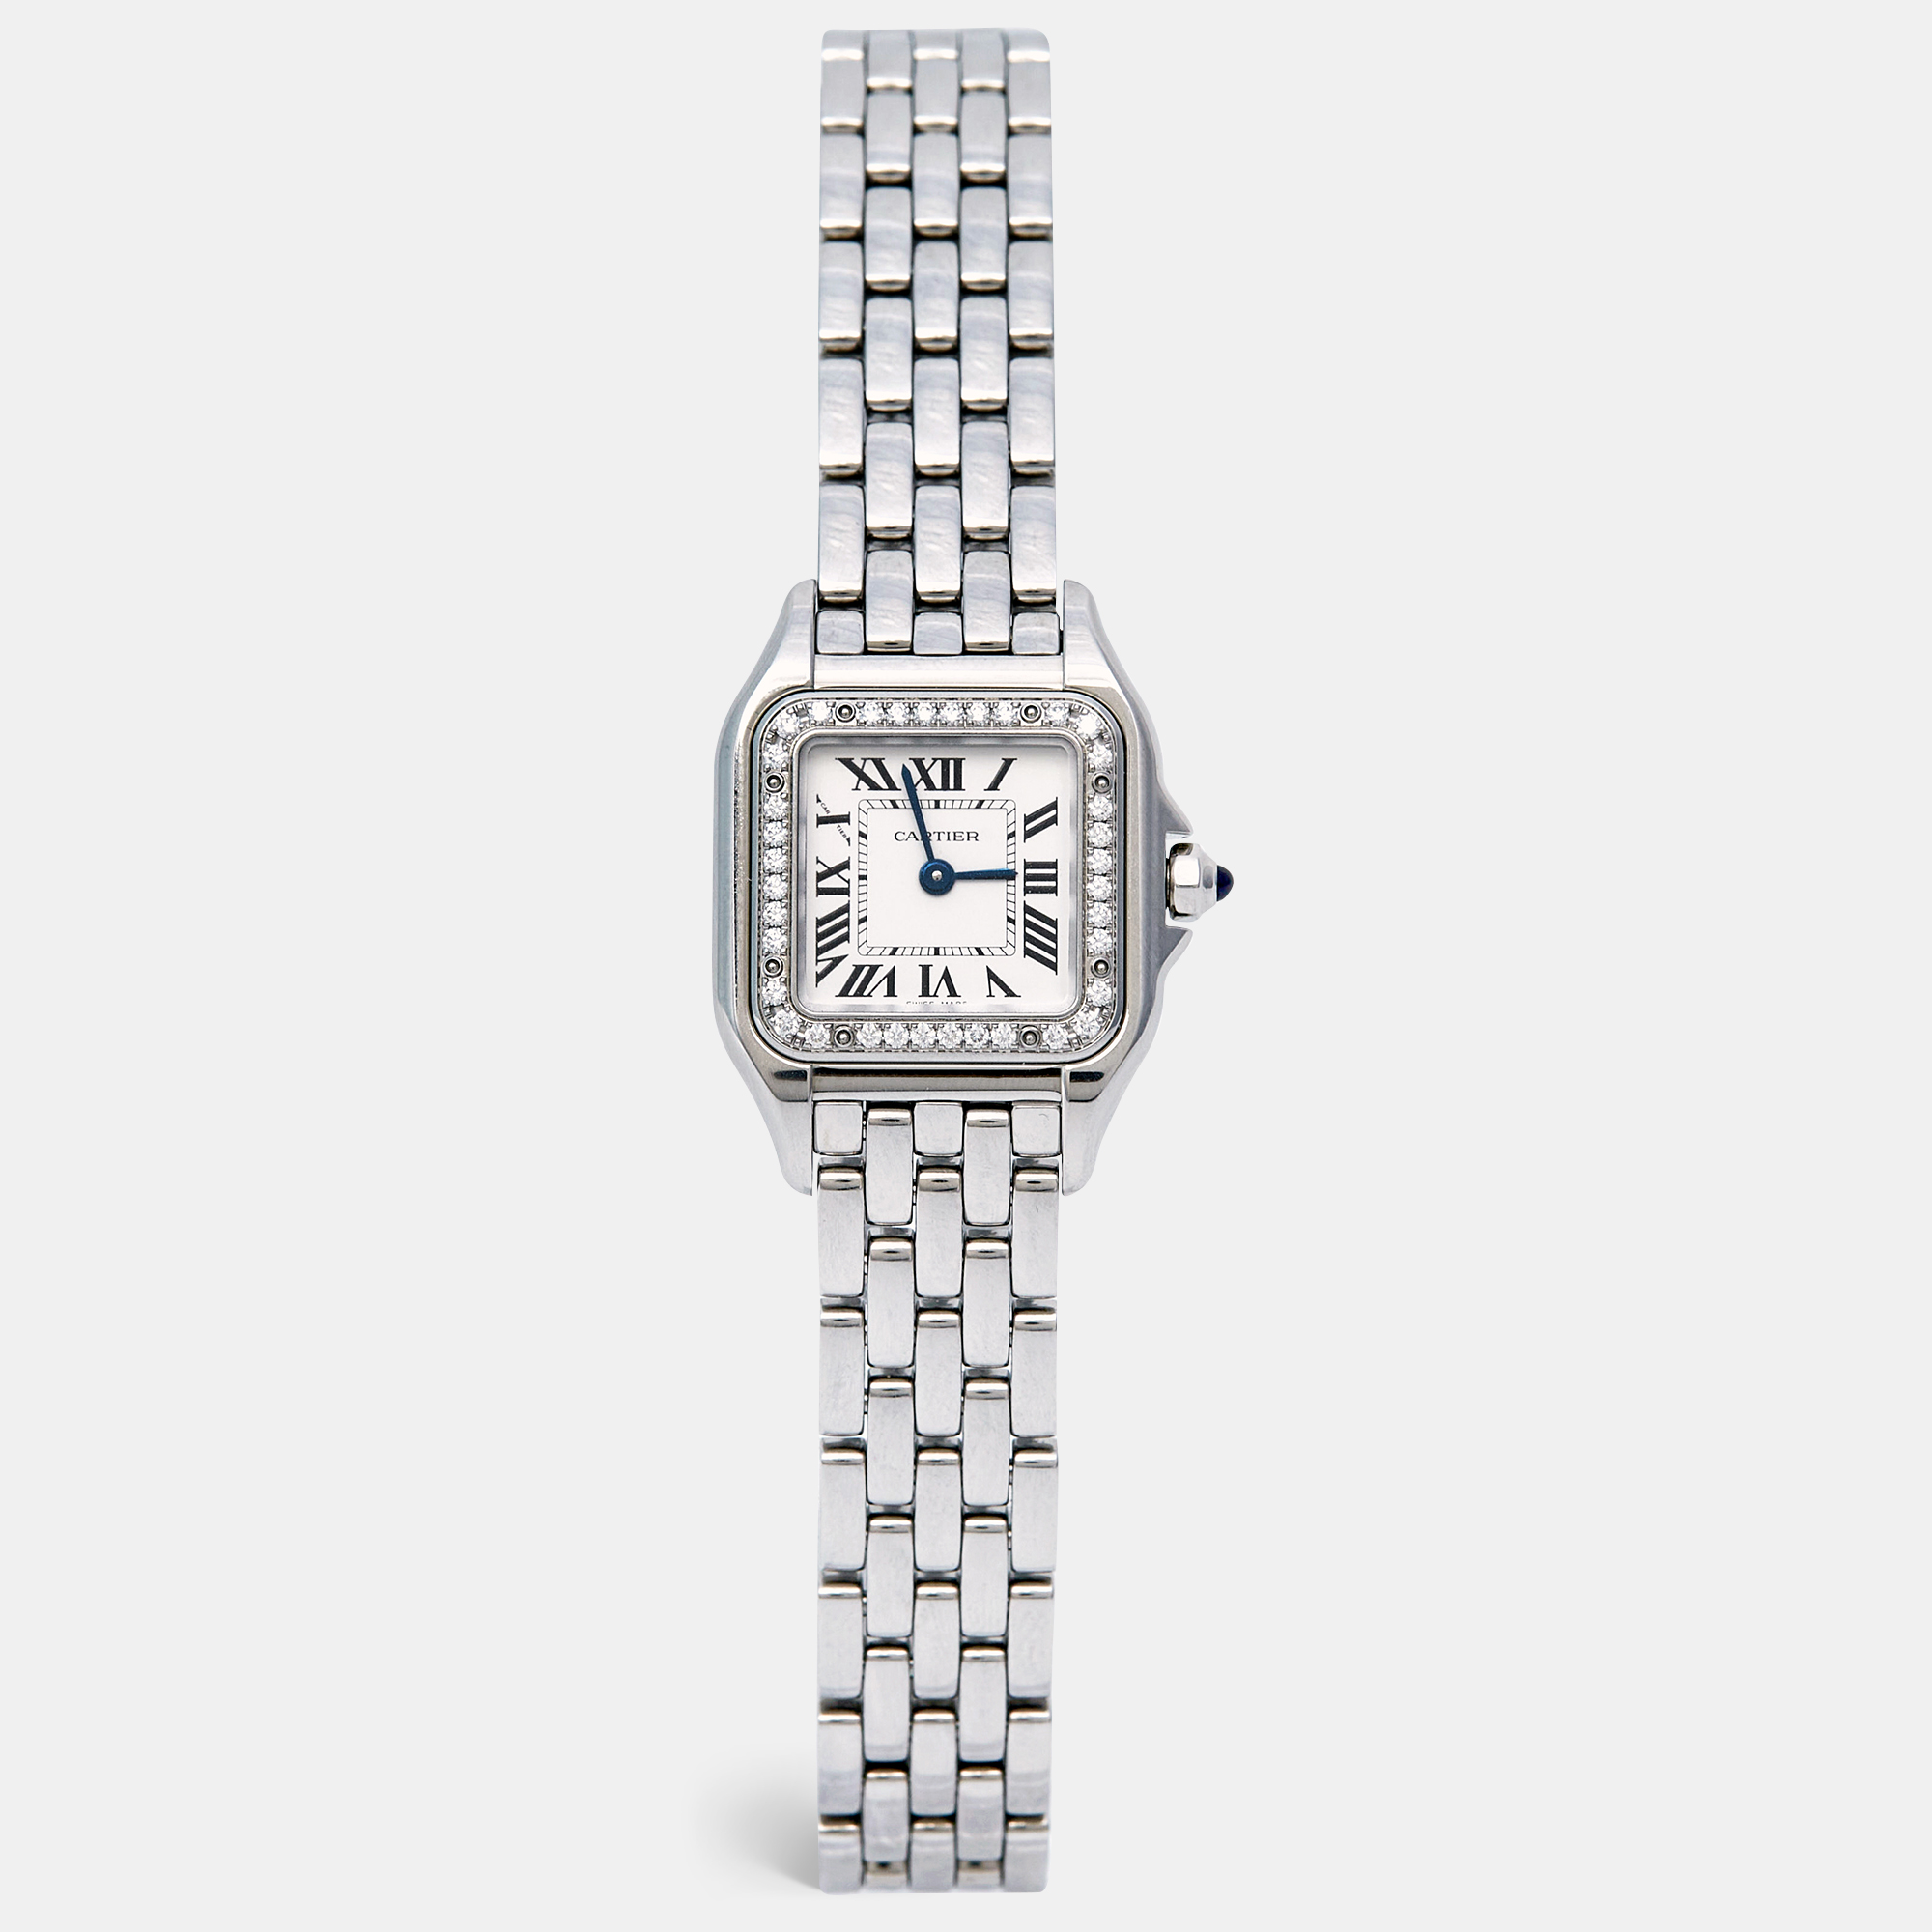 This Panthère de Cartier from Cartier is a creation worthy of being yours. As a true style icon It has a grand fusion of elegance with contemporary charm in every detail from the square case to the concealed clasp. Using stainless steel Cartier sculpted out the watch and had the case held by a chain link bracelet. The bezel has diamonds and the case is fitted with a white dial featuring Roman numeral hour markers and two blue hands. This Quartz timepiece is a symbol of ageless beauty